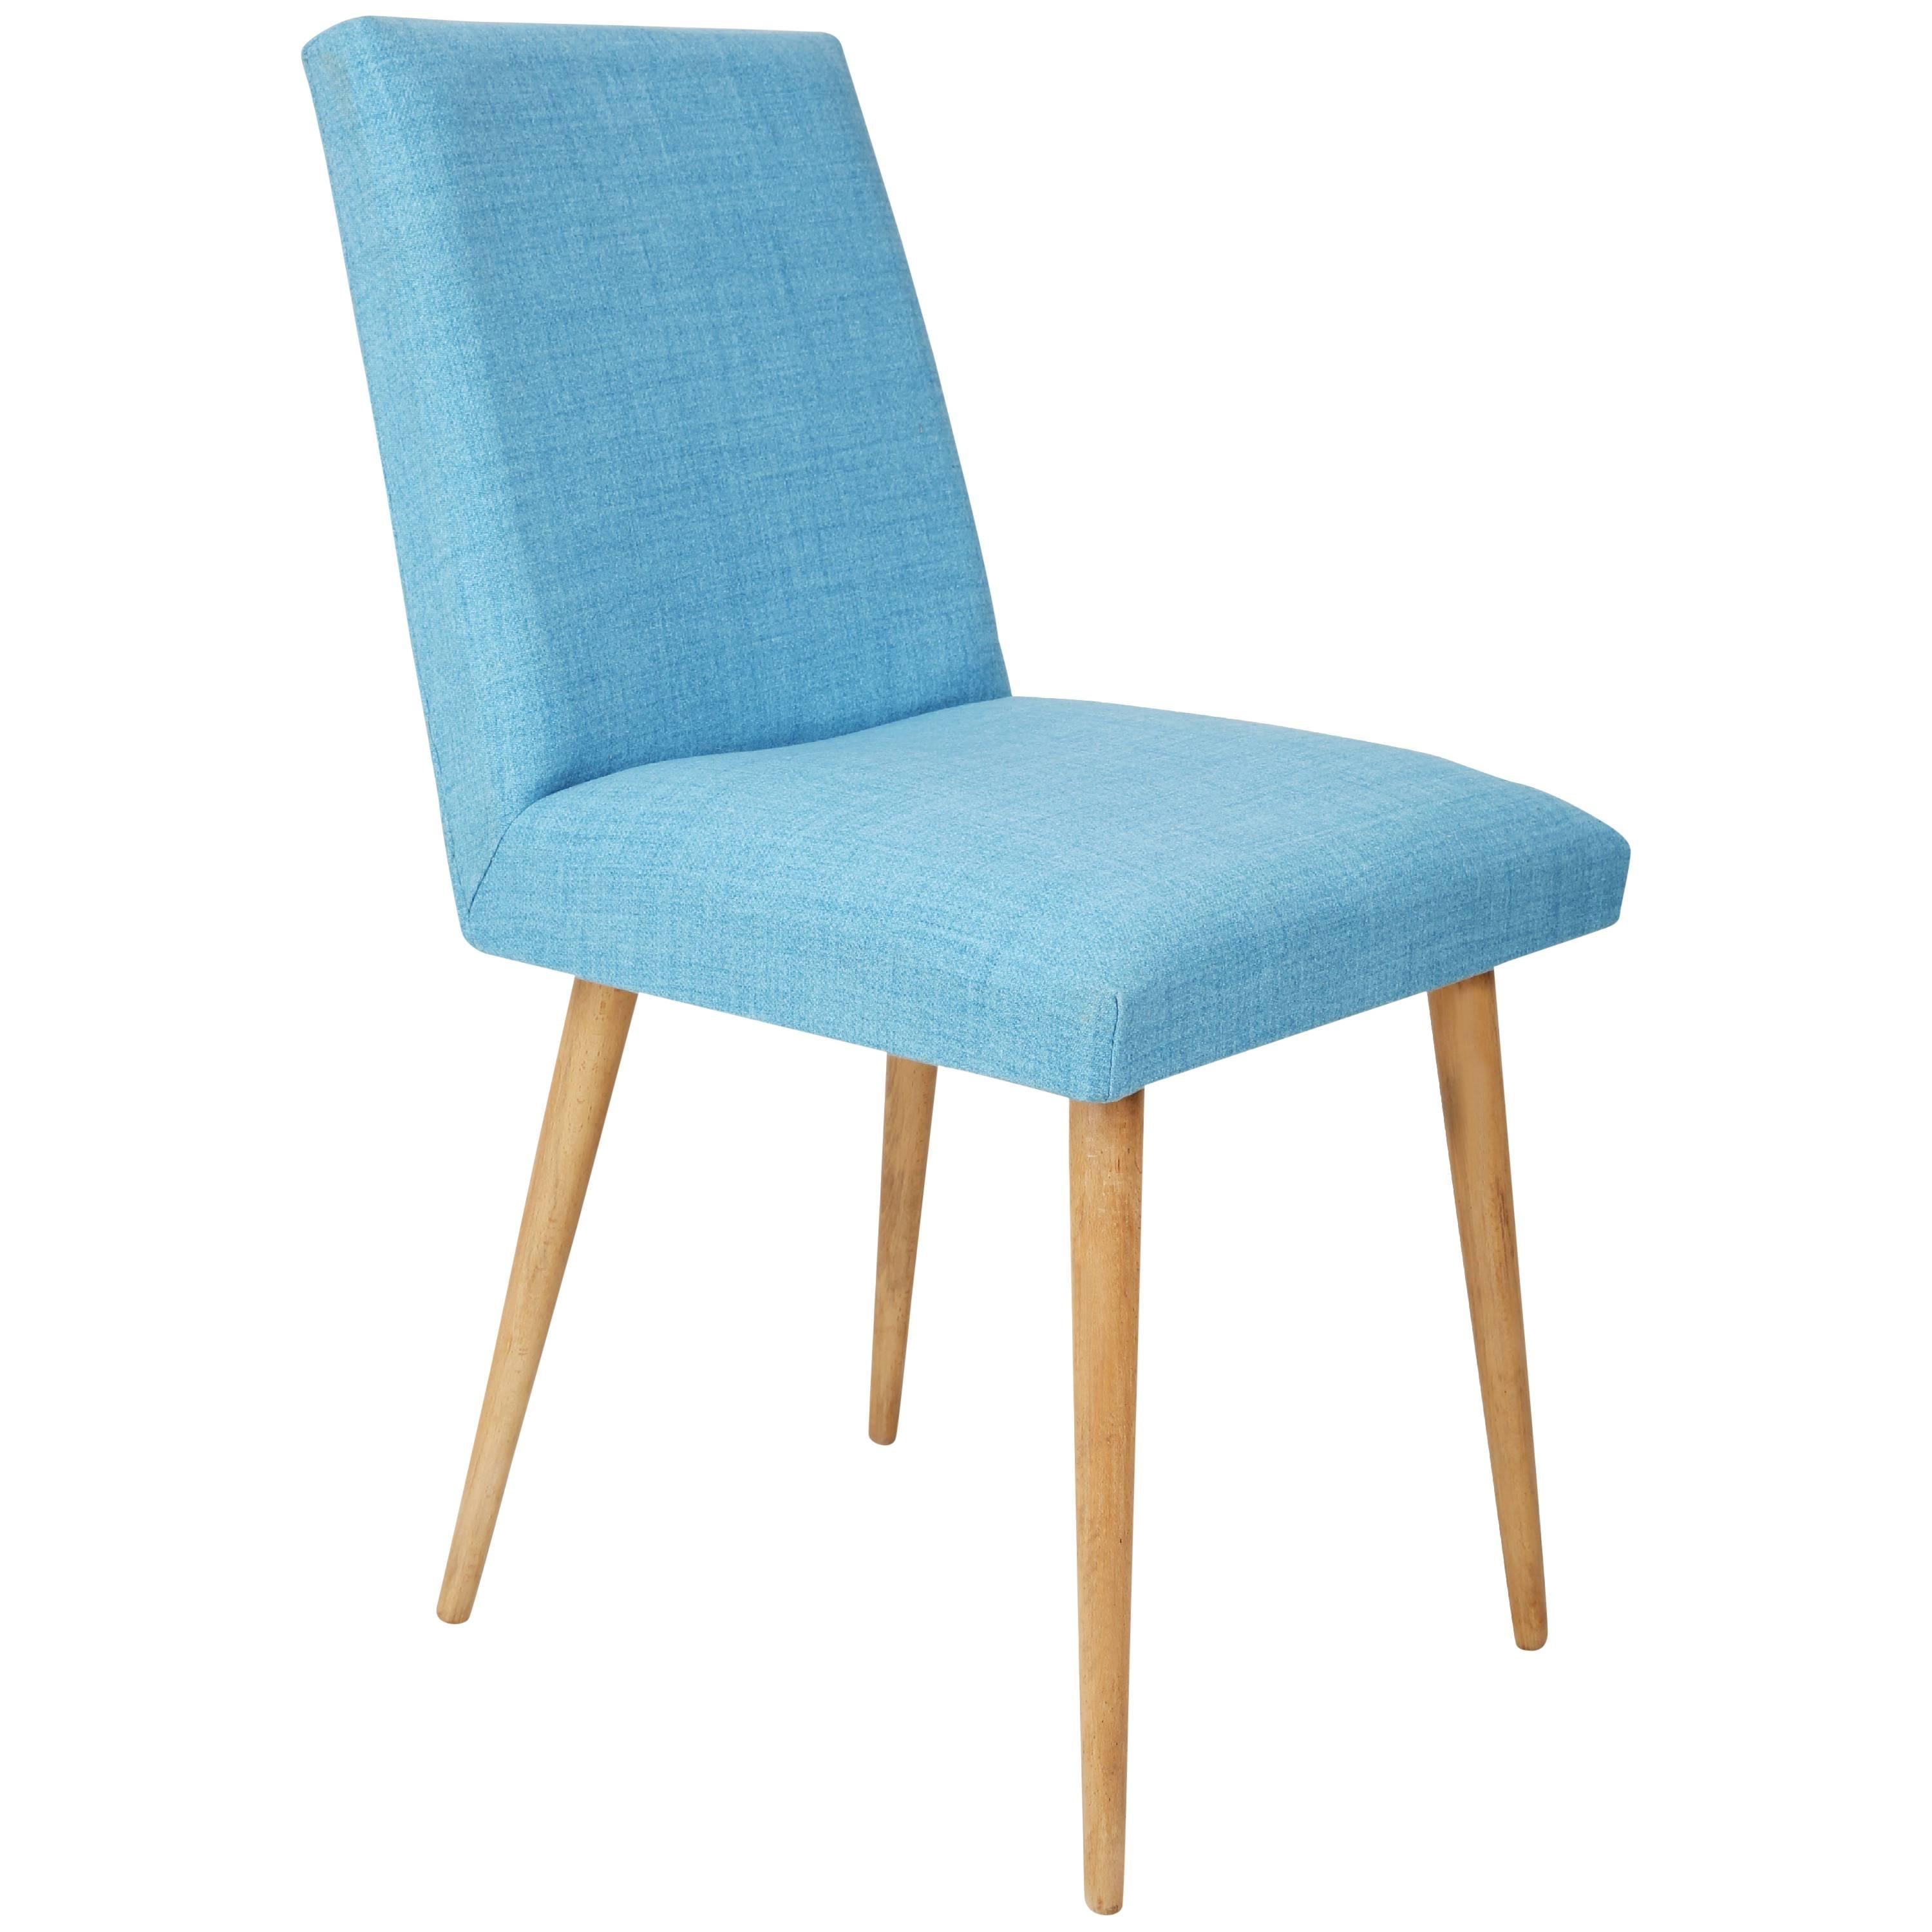 Mid Century Baby Blue Chair with Light Wood Legs, 1960s, Poland